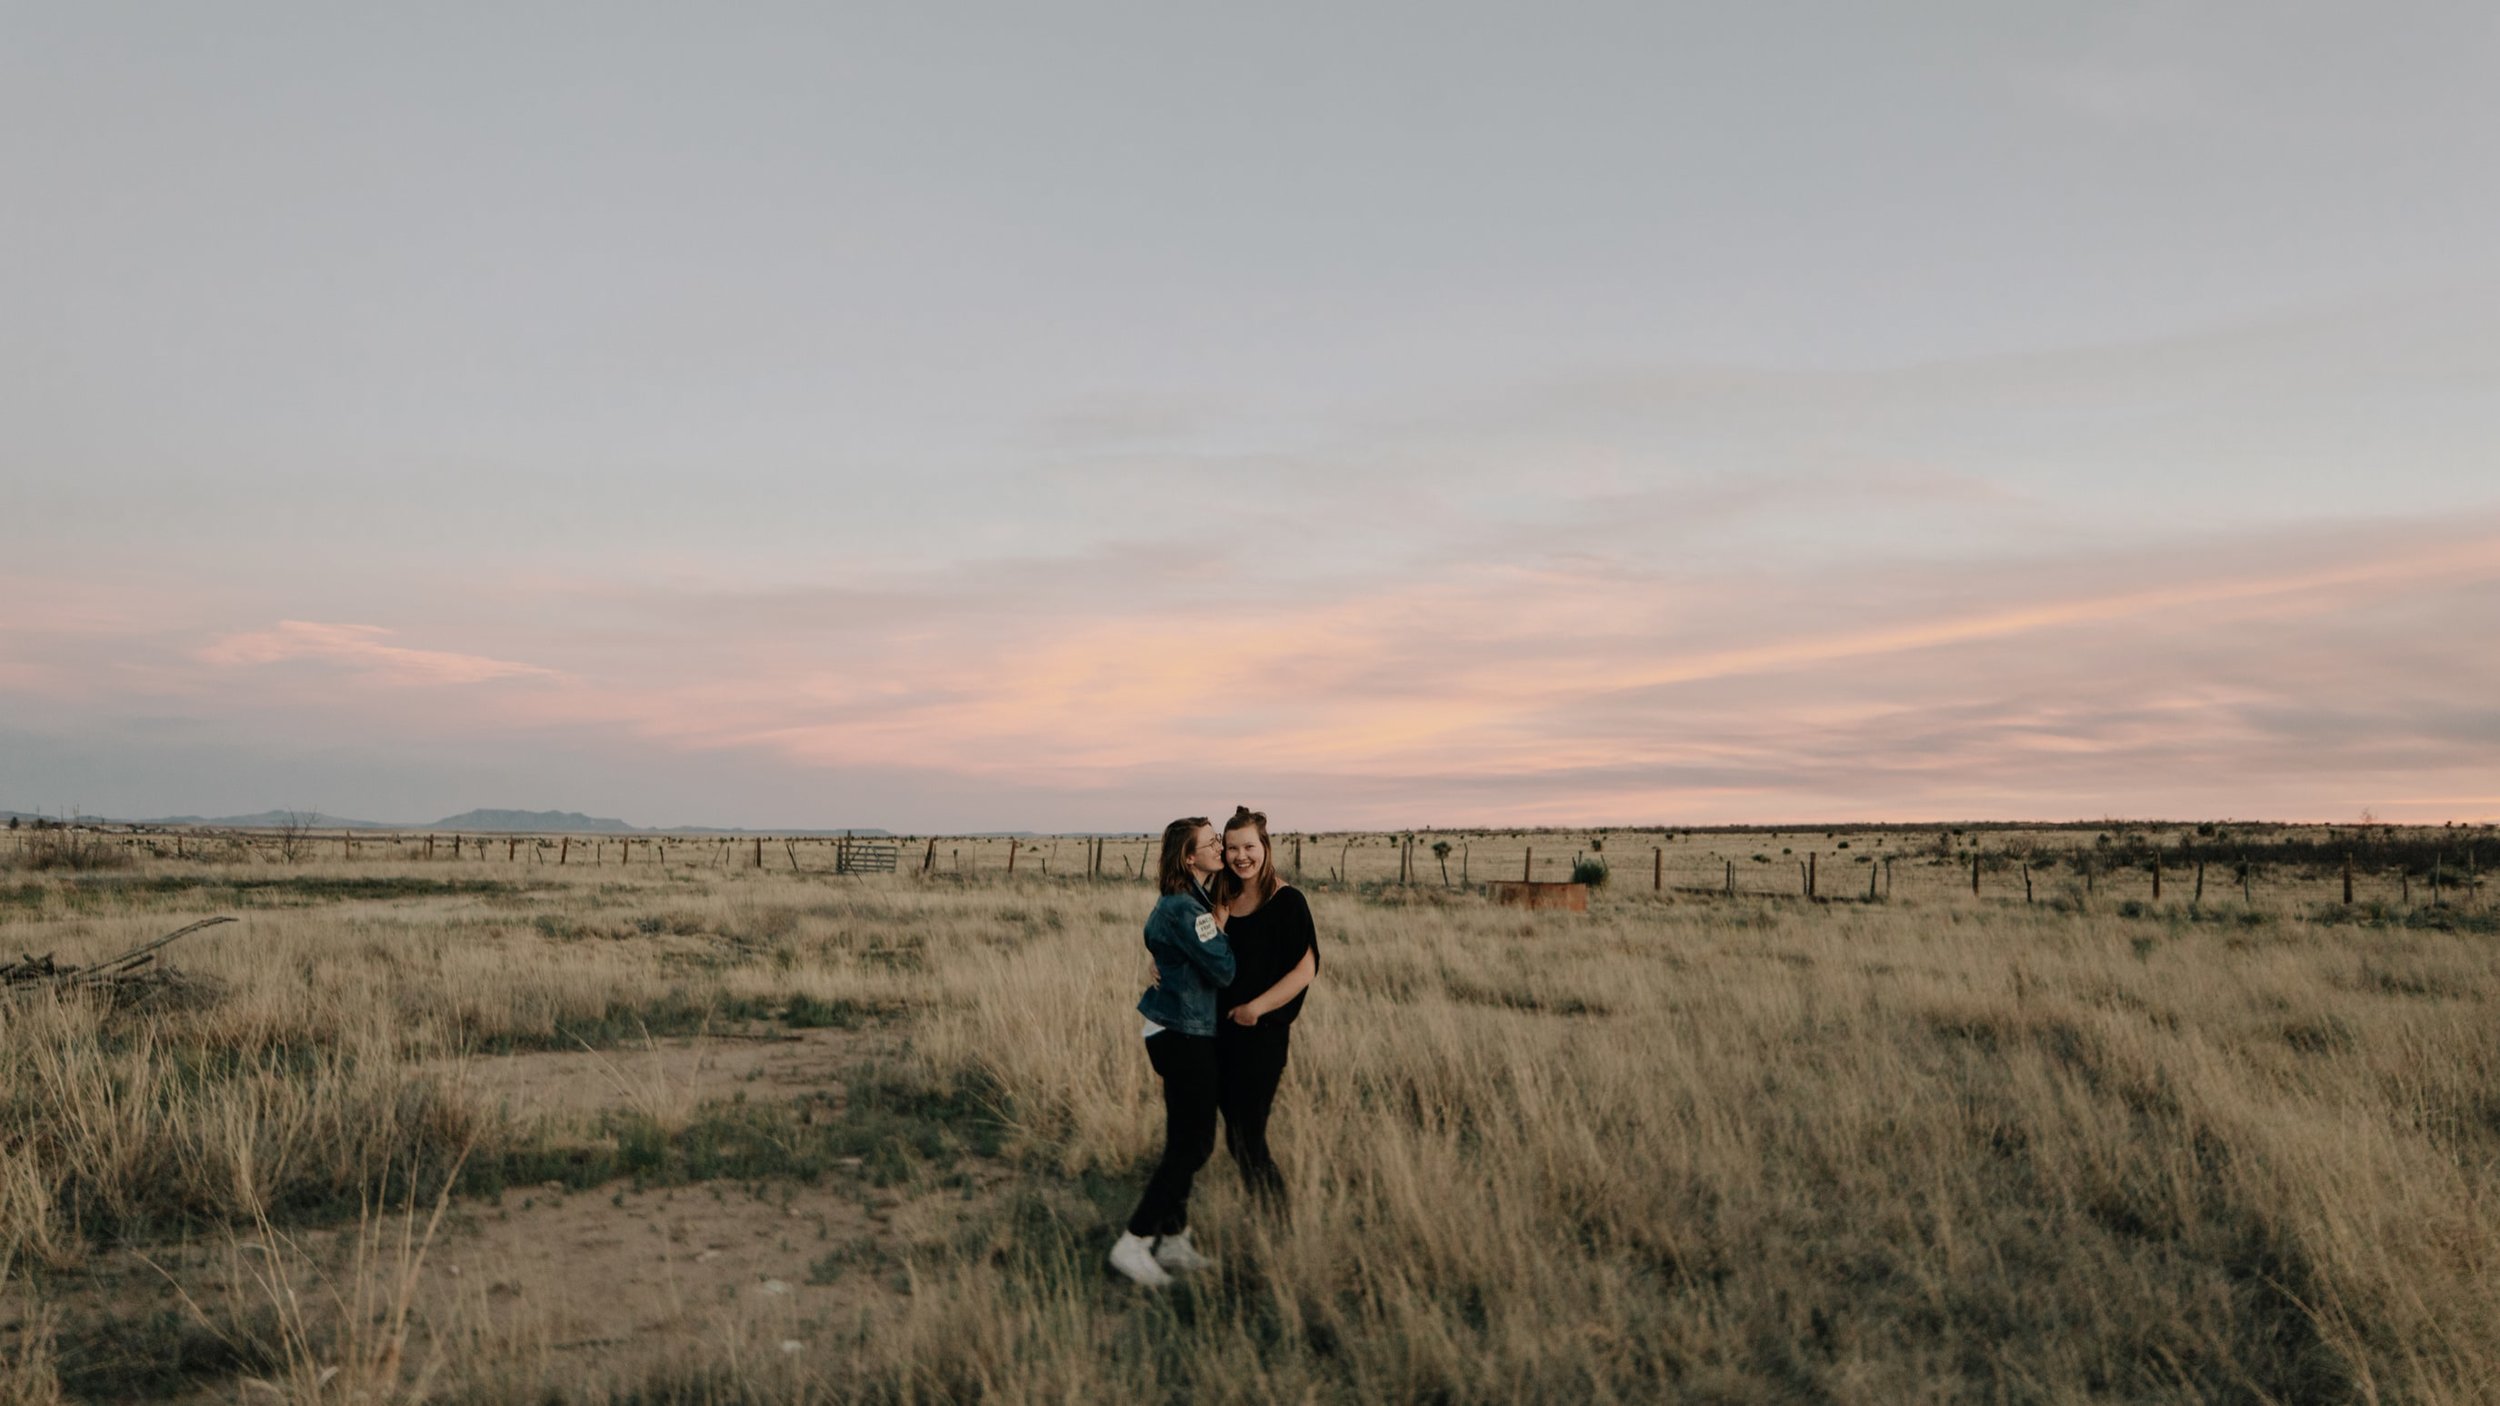 Two women embrace in a field during sunset in Marfa, Texas.